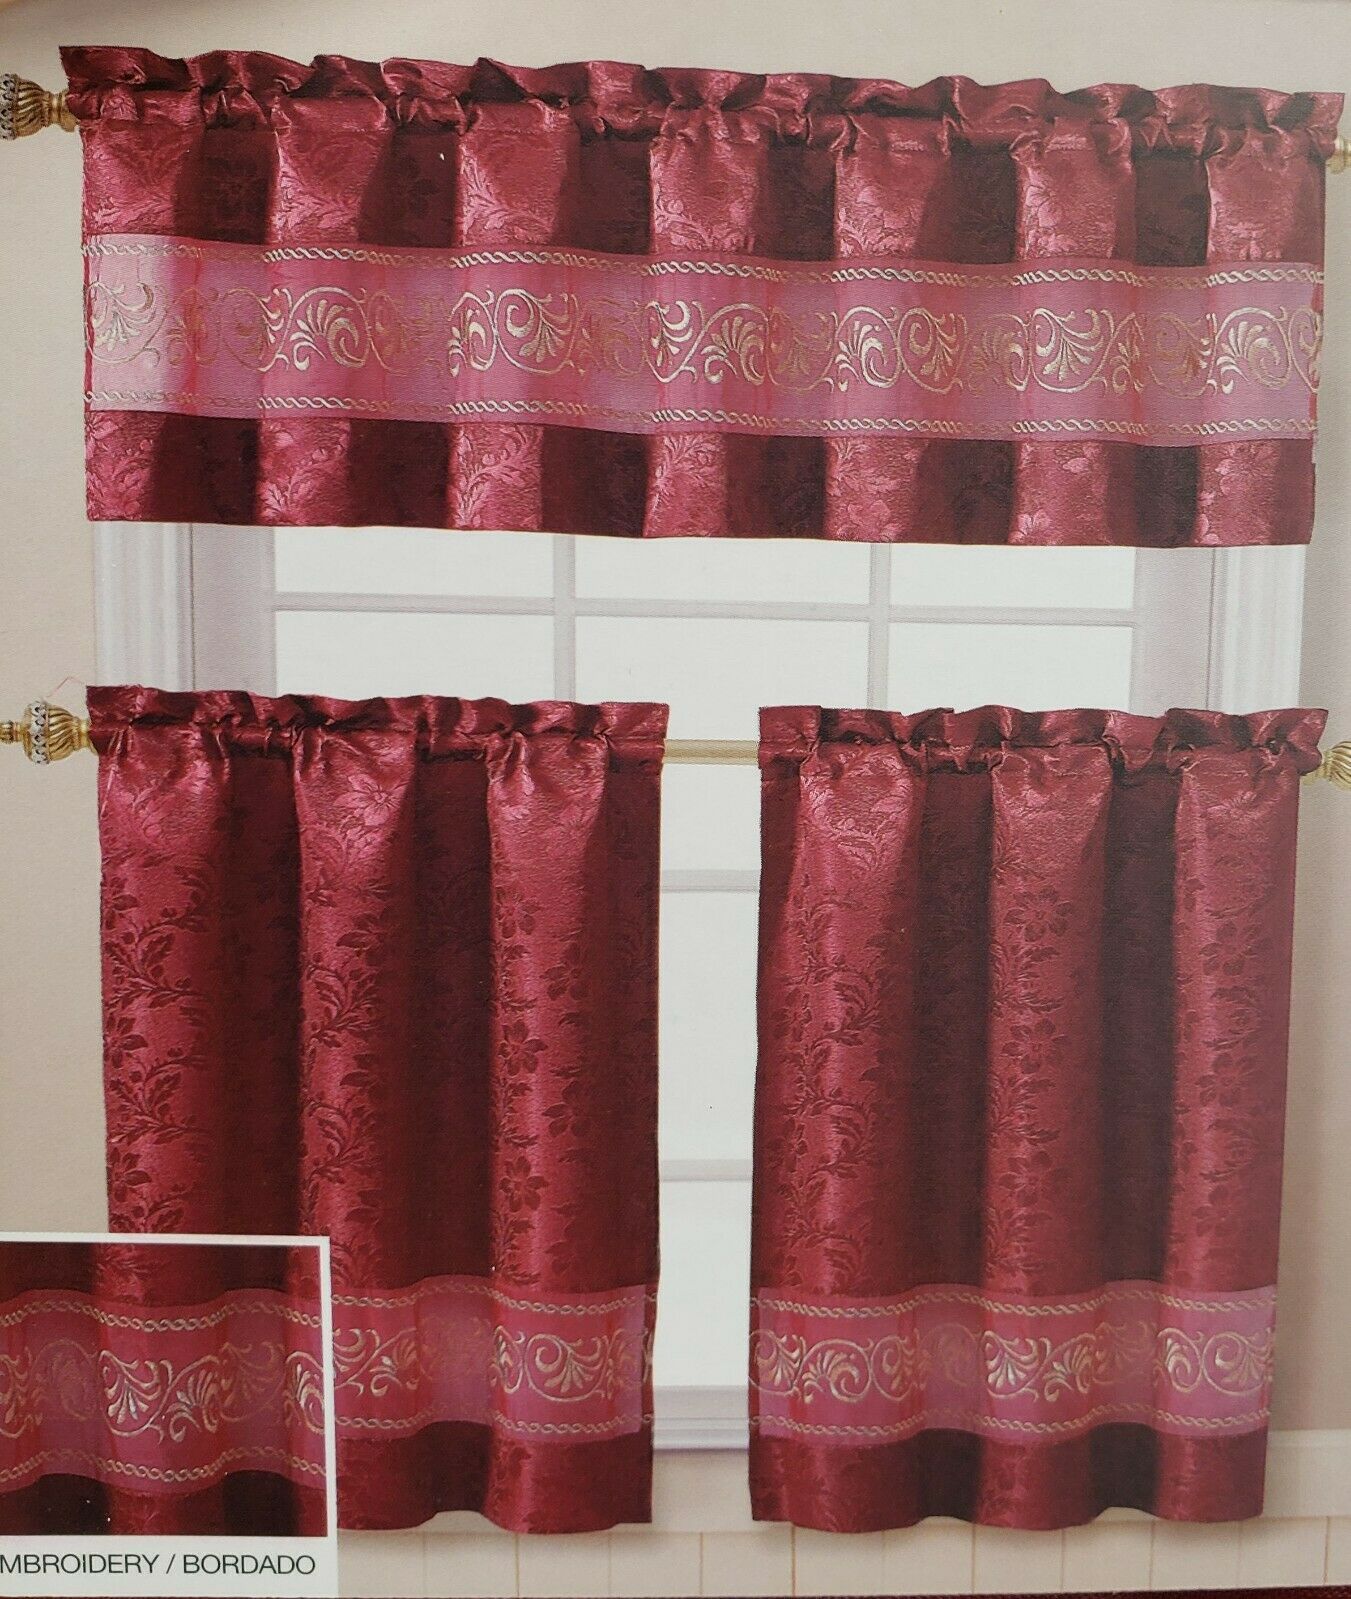 Primary image for 3pc. Embroidery Curtains Set:2 Tiers 28"x36" & Valance(57"x18") ARIEL FLOWERS,VC